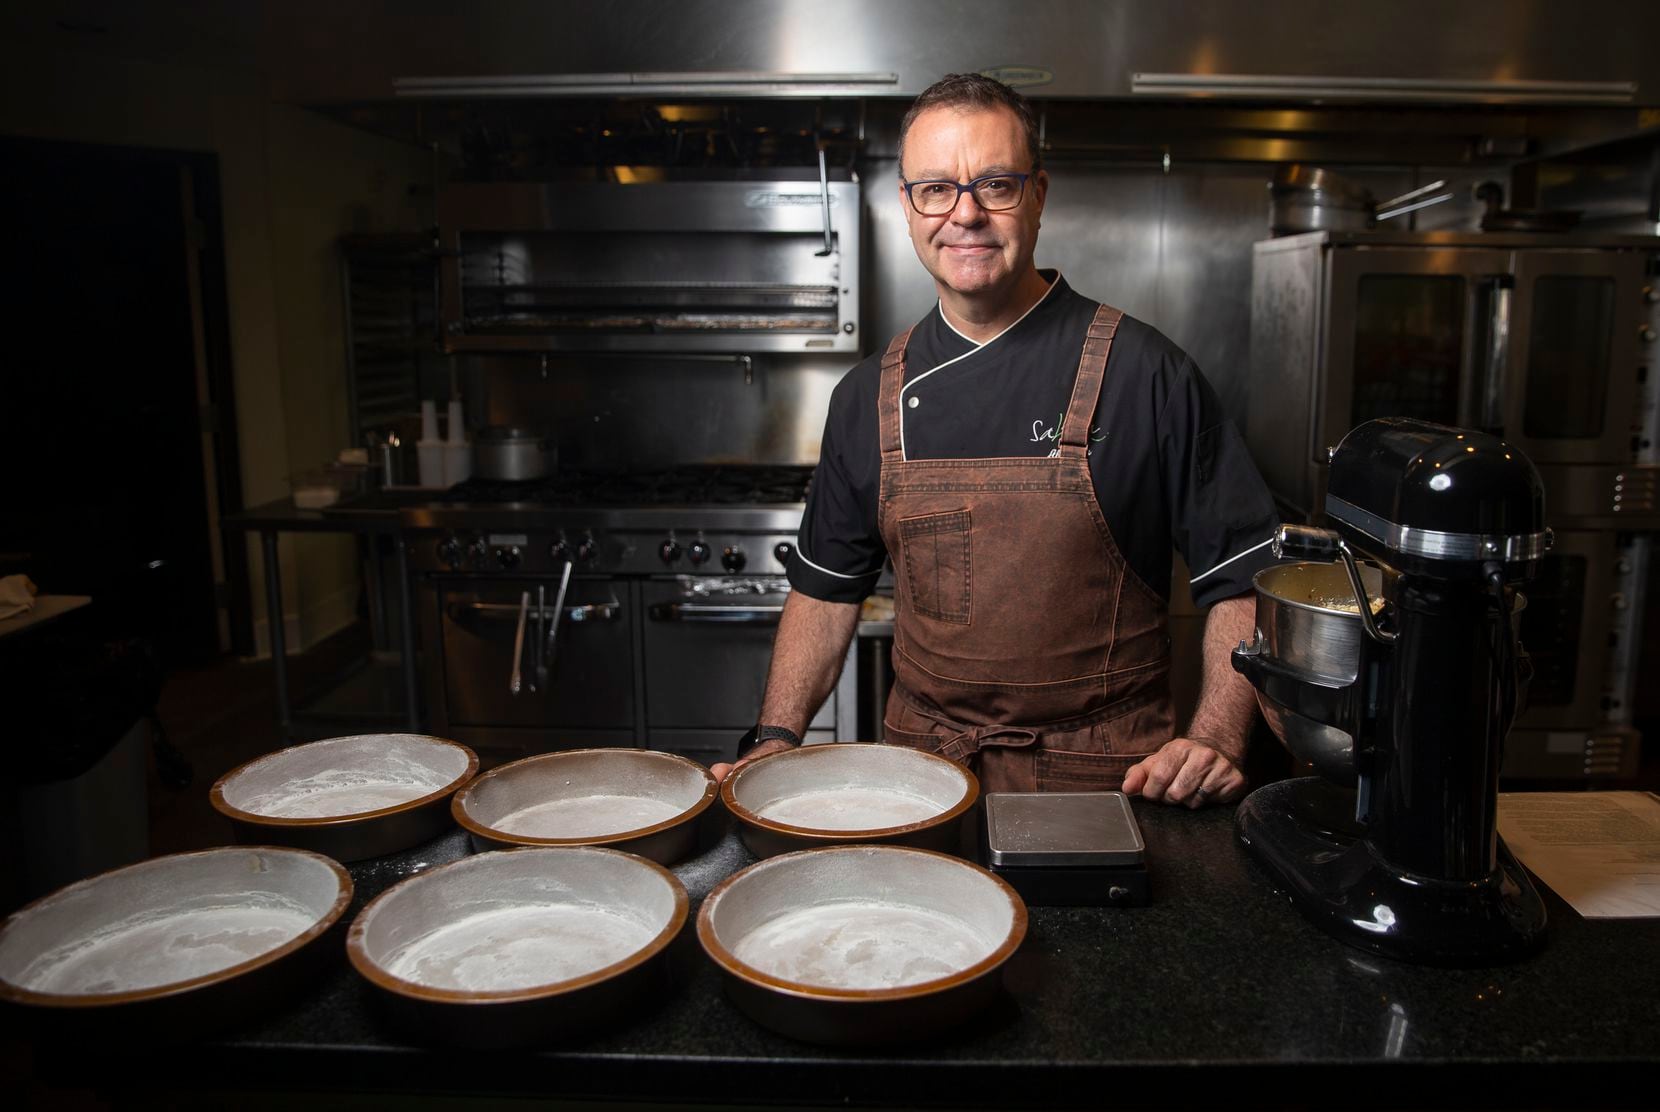 Chef Abraham Salum poses for a portrait at Salum restaurant on Cole Avenue on May 7, 2020 in Dallas.